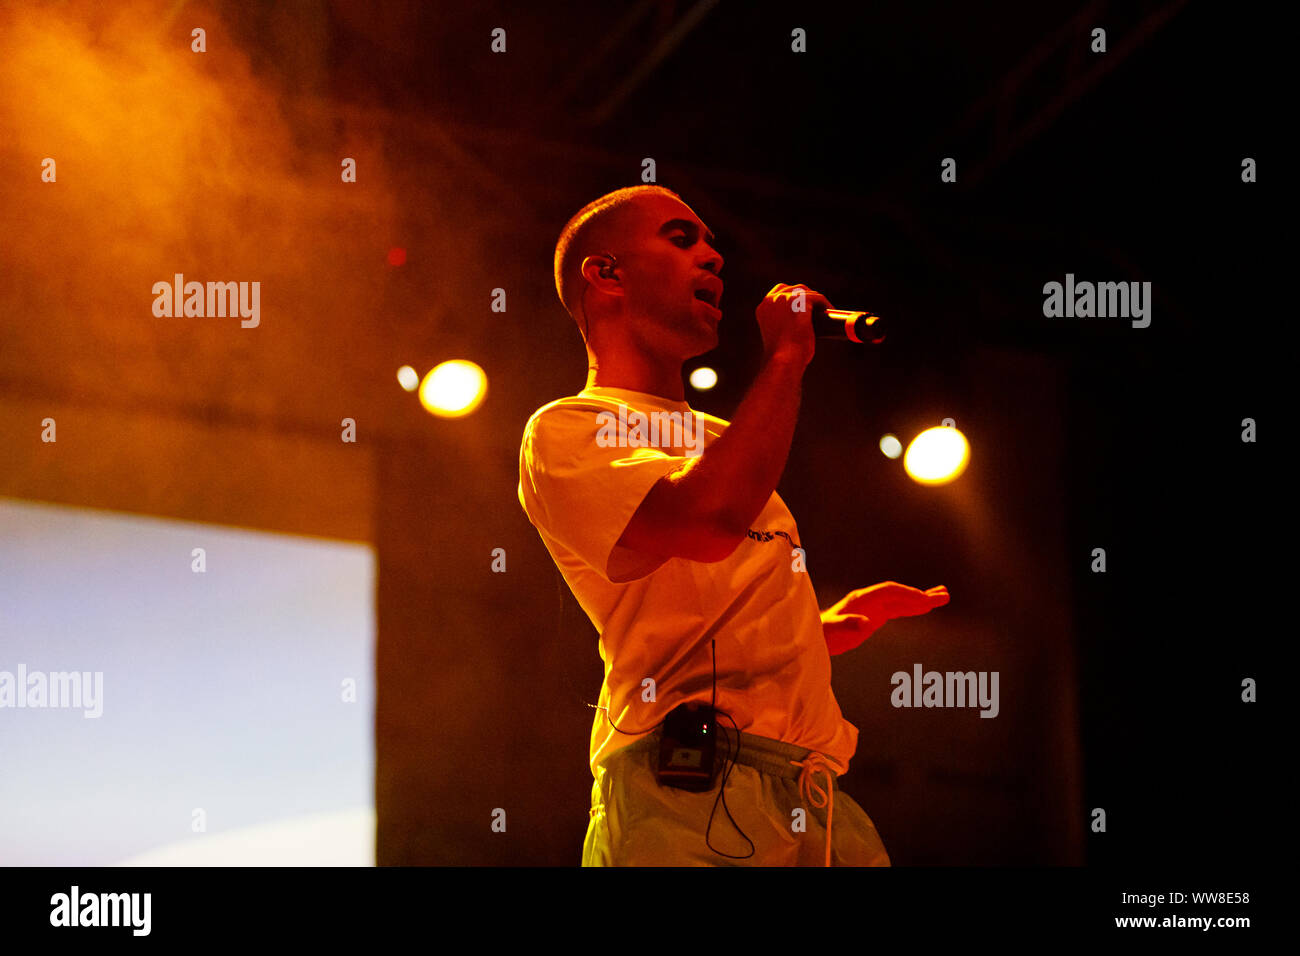 Bologna, ITALY. 13 September, 2019. Italian singer-songwriter Mahmood performs live on September 13, 2019 in Bologna, Italy. Credit: Massimiliano Donati/Alamy Live News Stock Photo